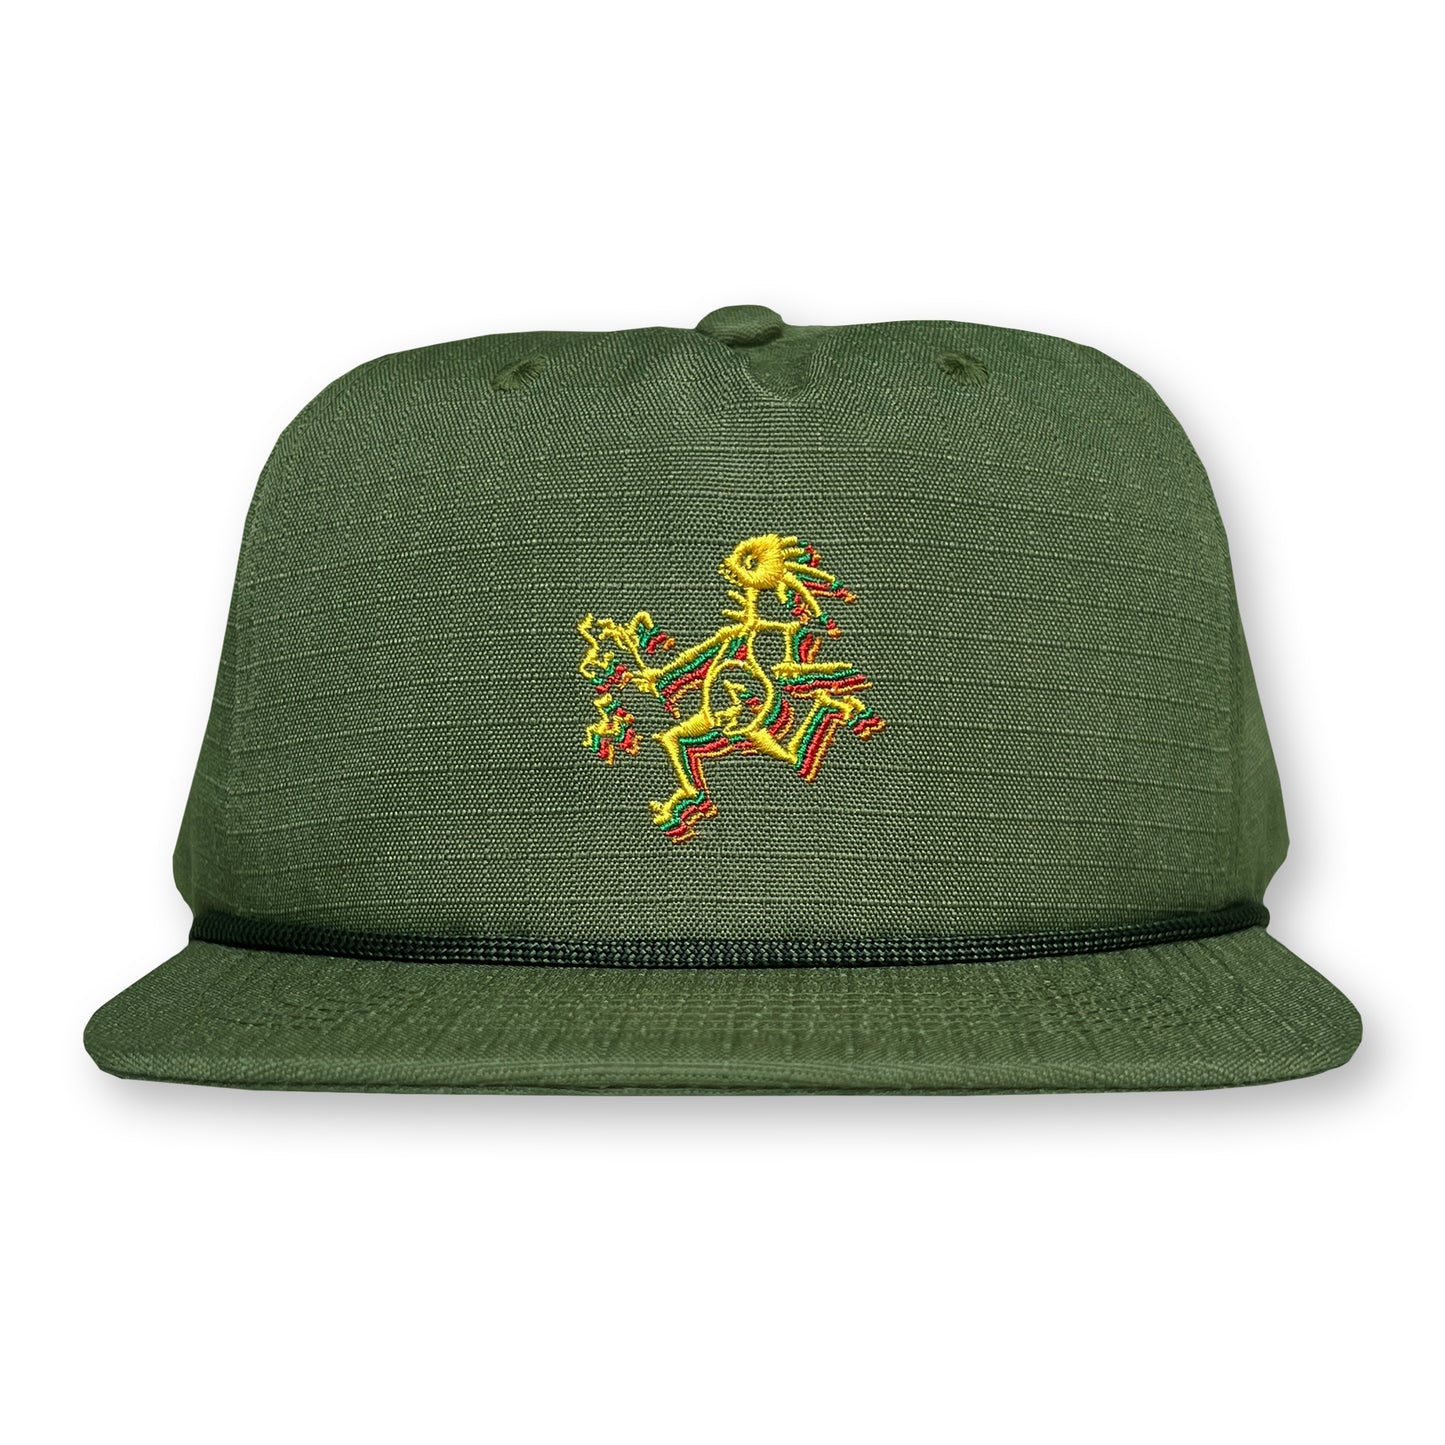 Widespread Panic Rope Hat / Olive Ripstop Nylon with Goldenrod Note Eater